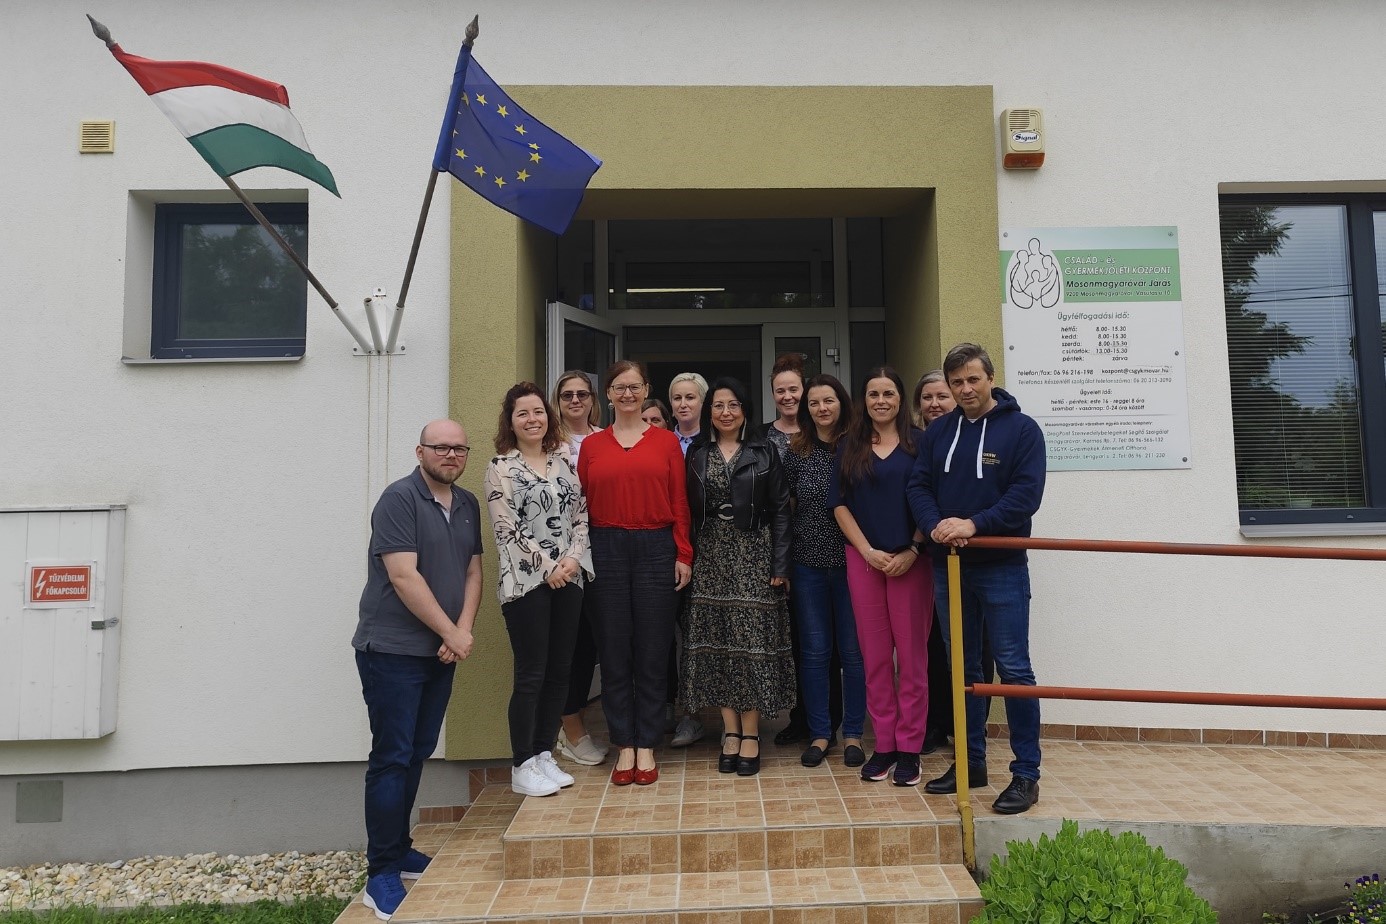 The guests visited the castle of the Albert Kázmér Mosonmagyaróvár Faculty of the Széchenyi István University in Ódvar, and got acquainted with the social institutions in the town, such as the Family and Child Welfare Centre, shown in the second picture.